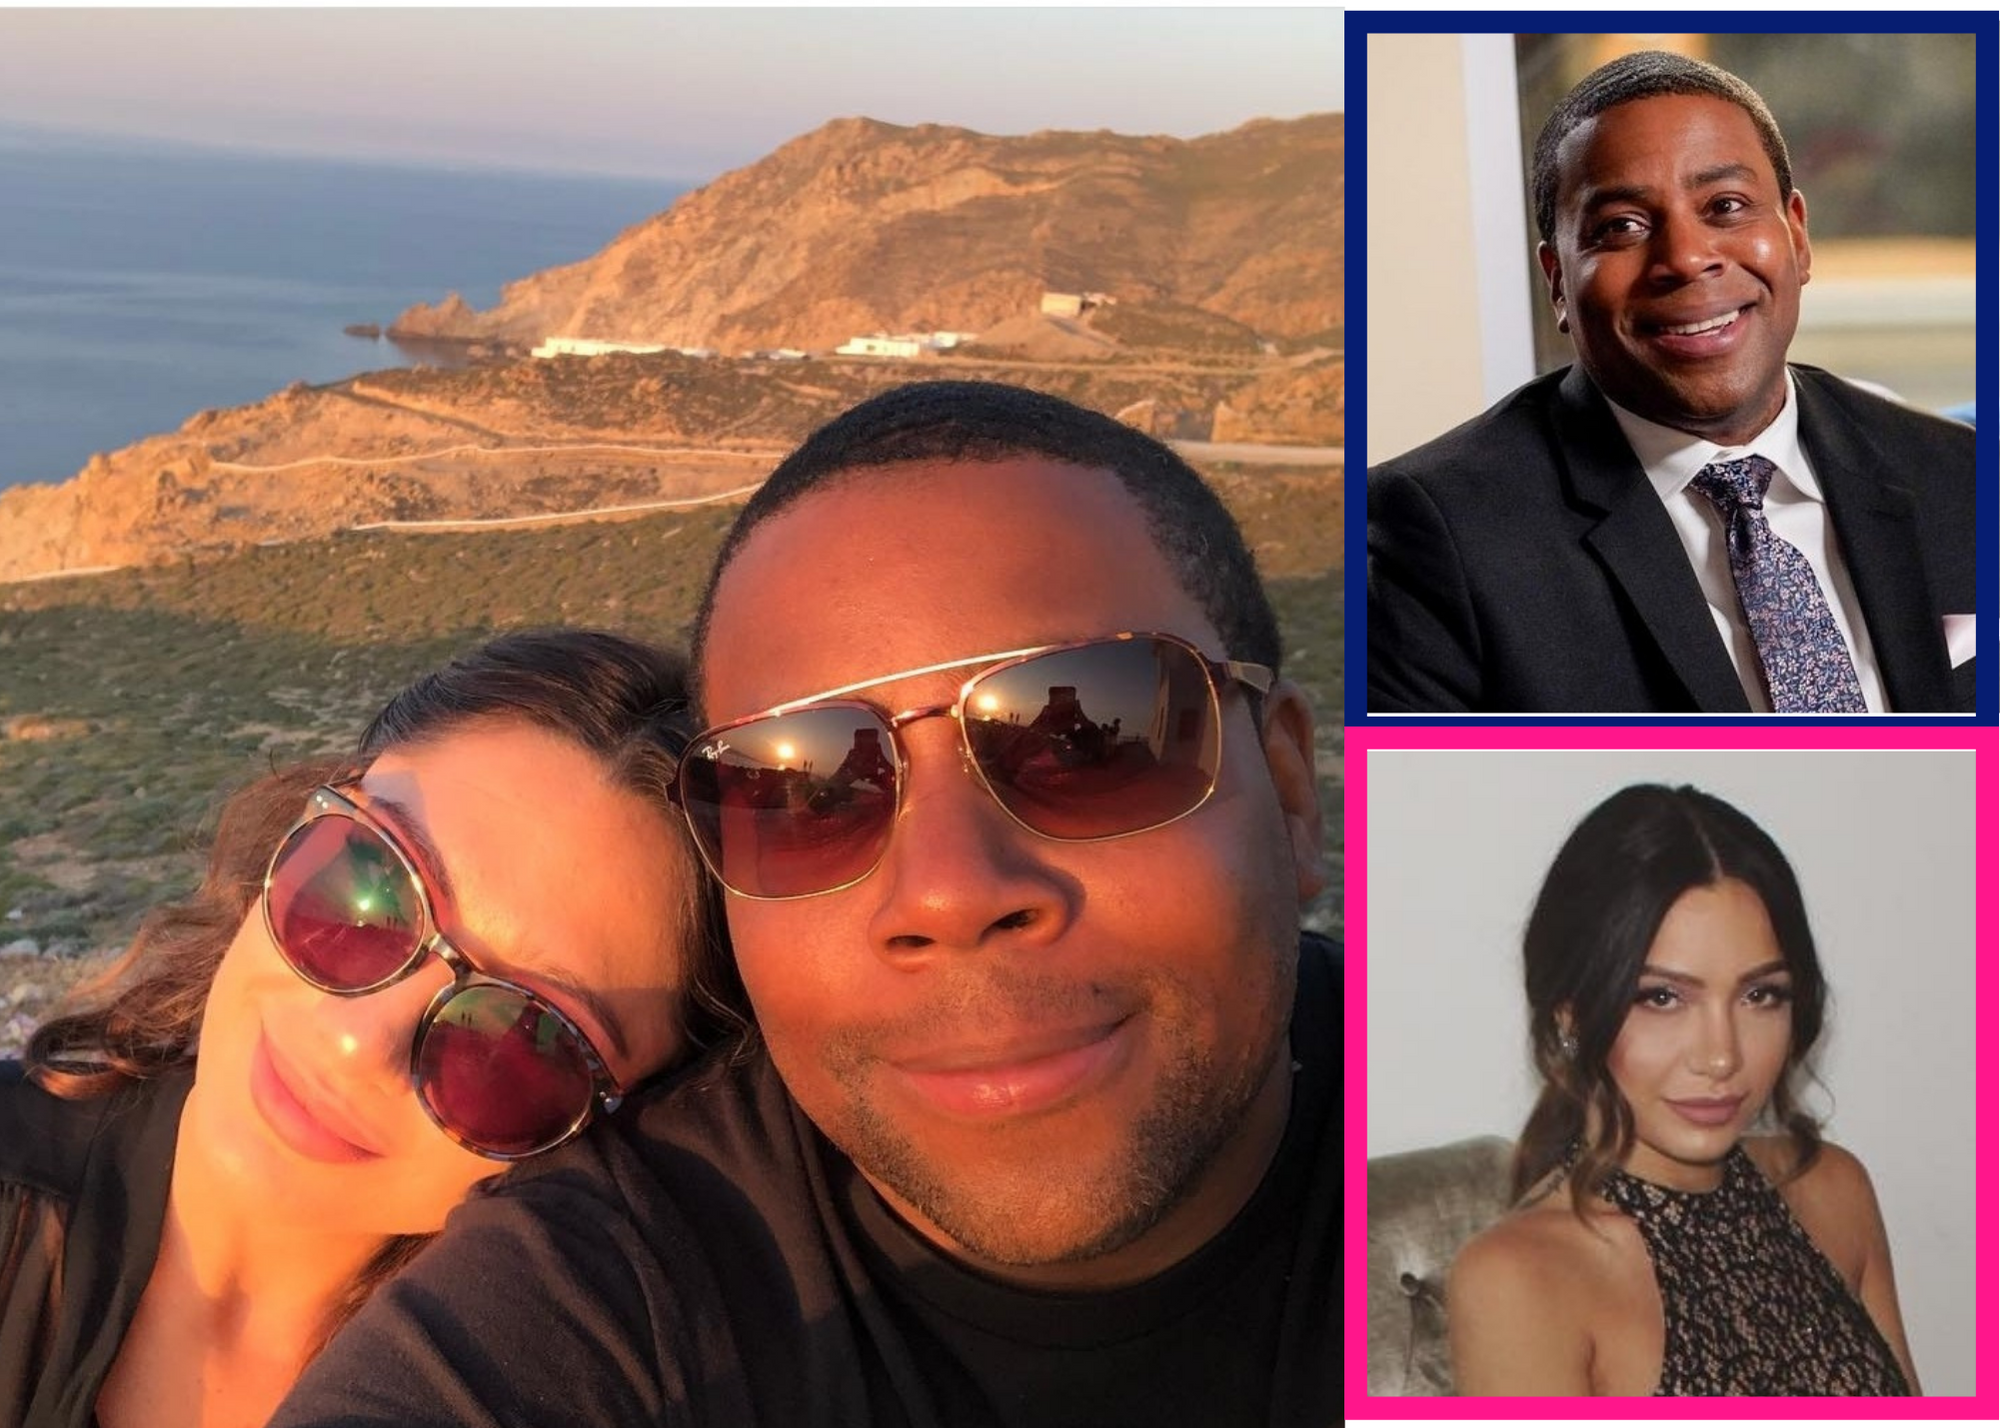 Kenan Thompson And Wife Christina Evangeline Split After 11 Years Of Marriage